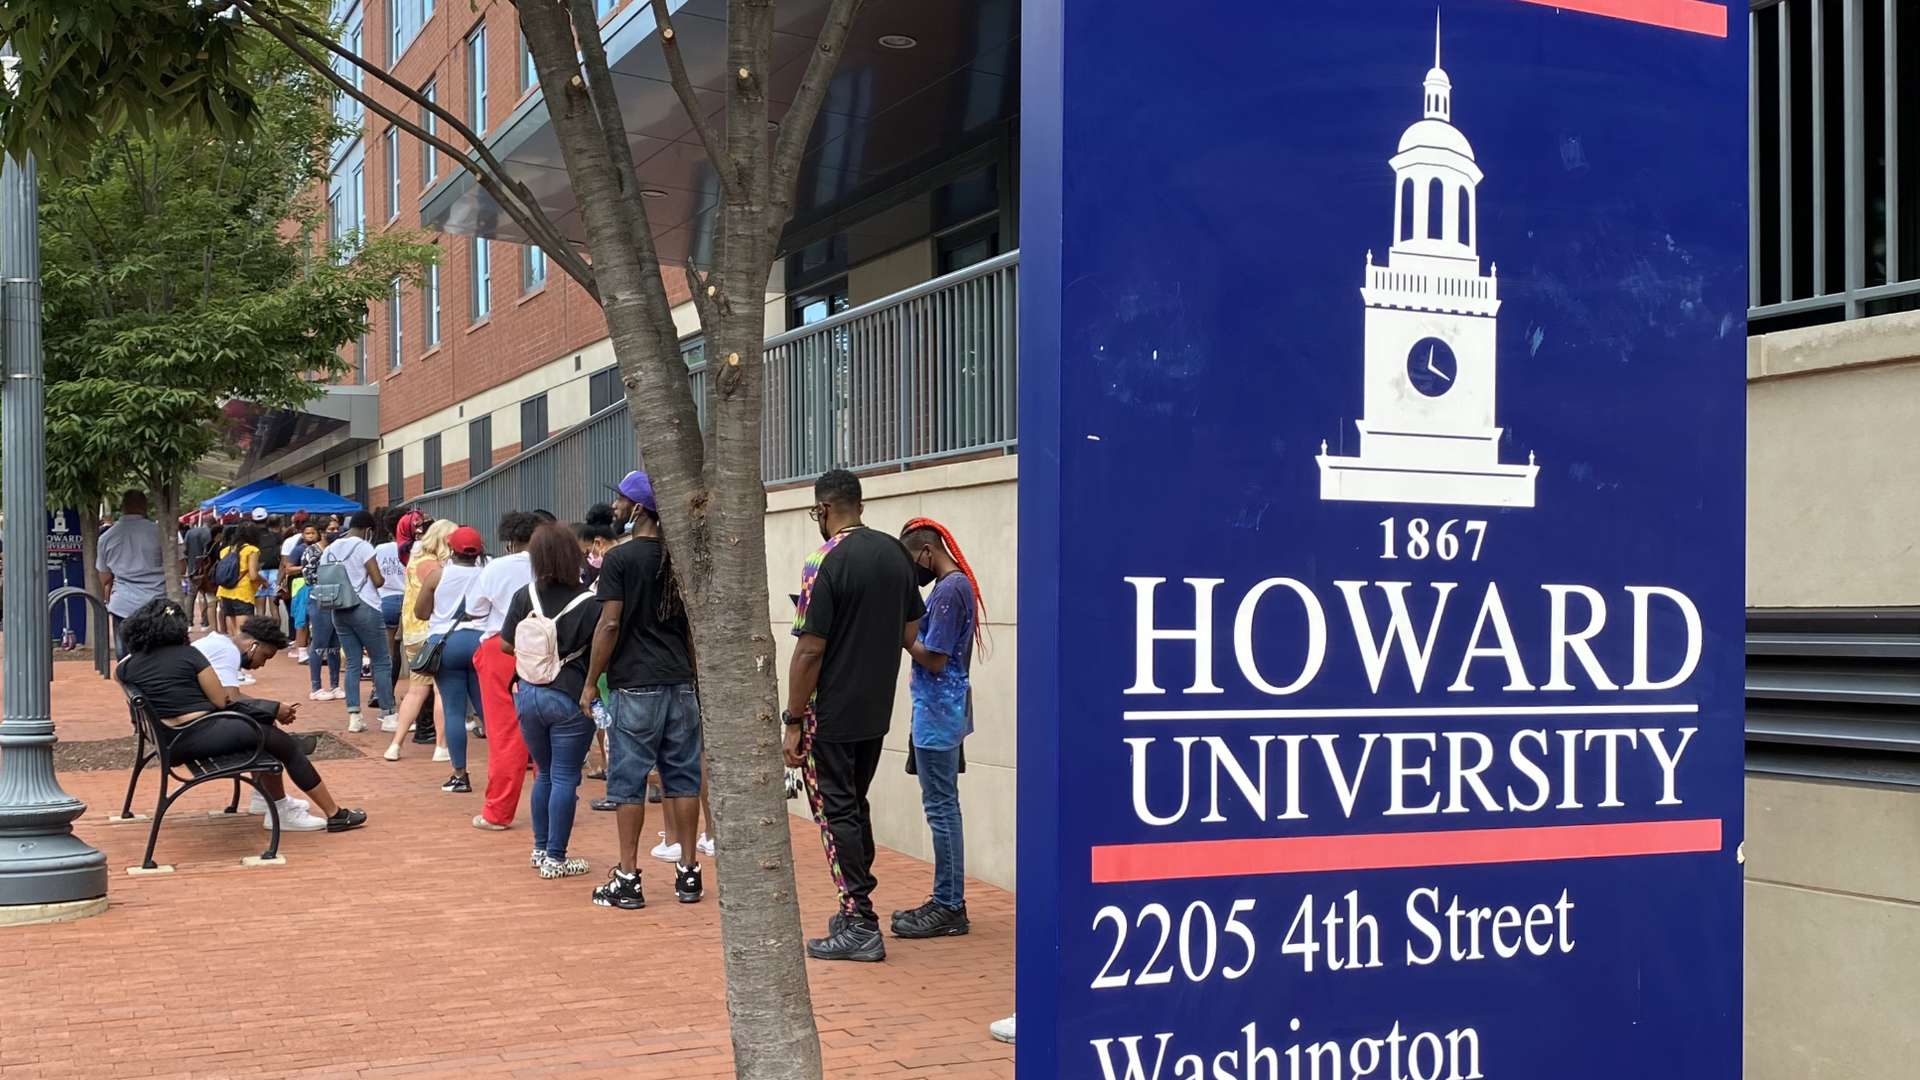 Howard University freshman move-in at the start of the 2021-22 school year.